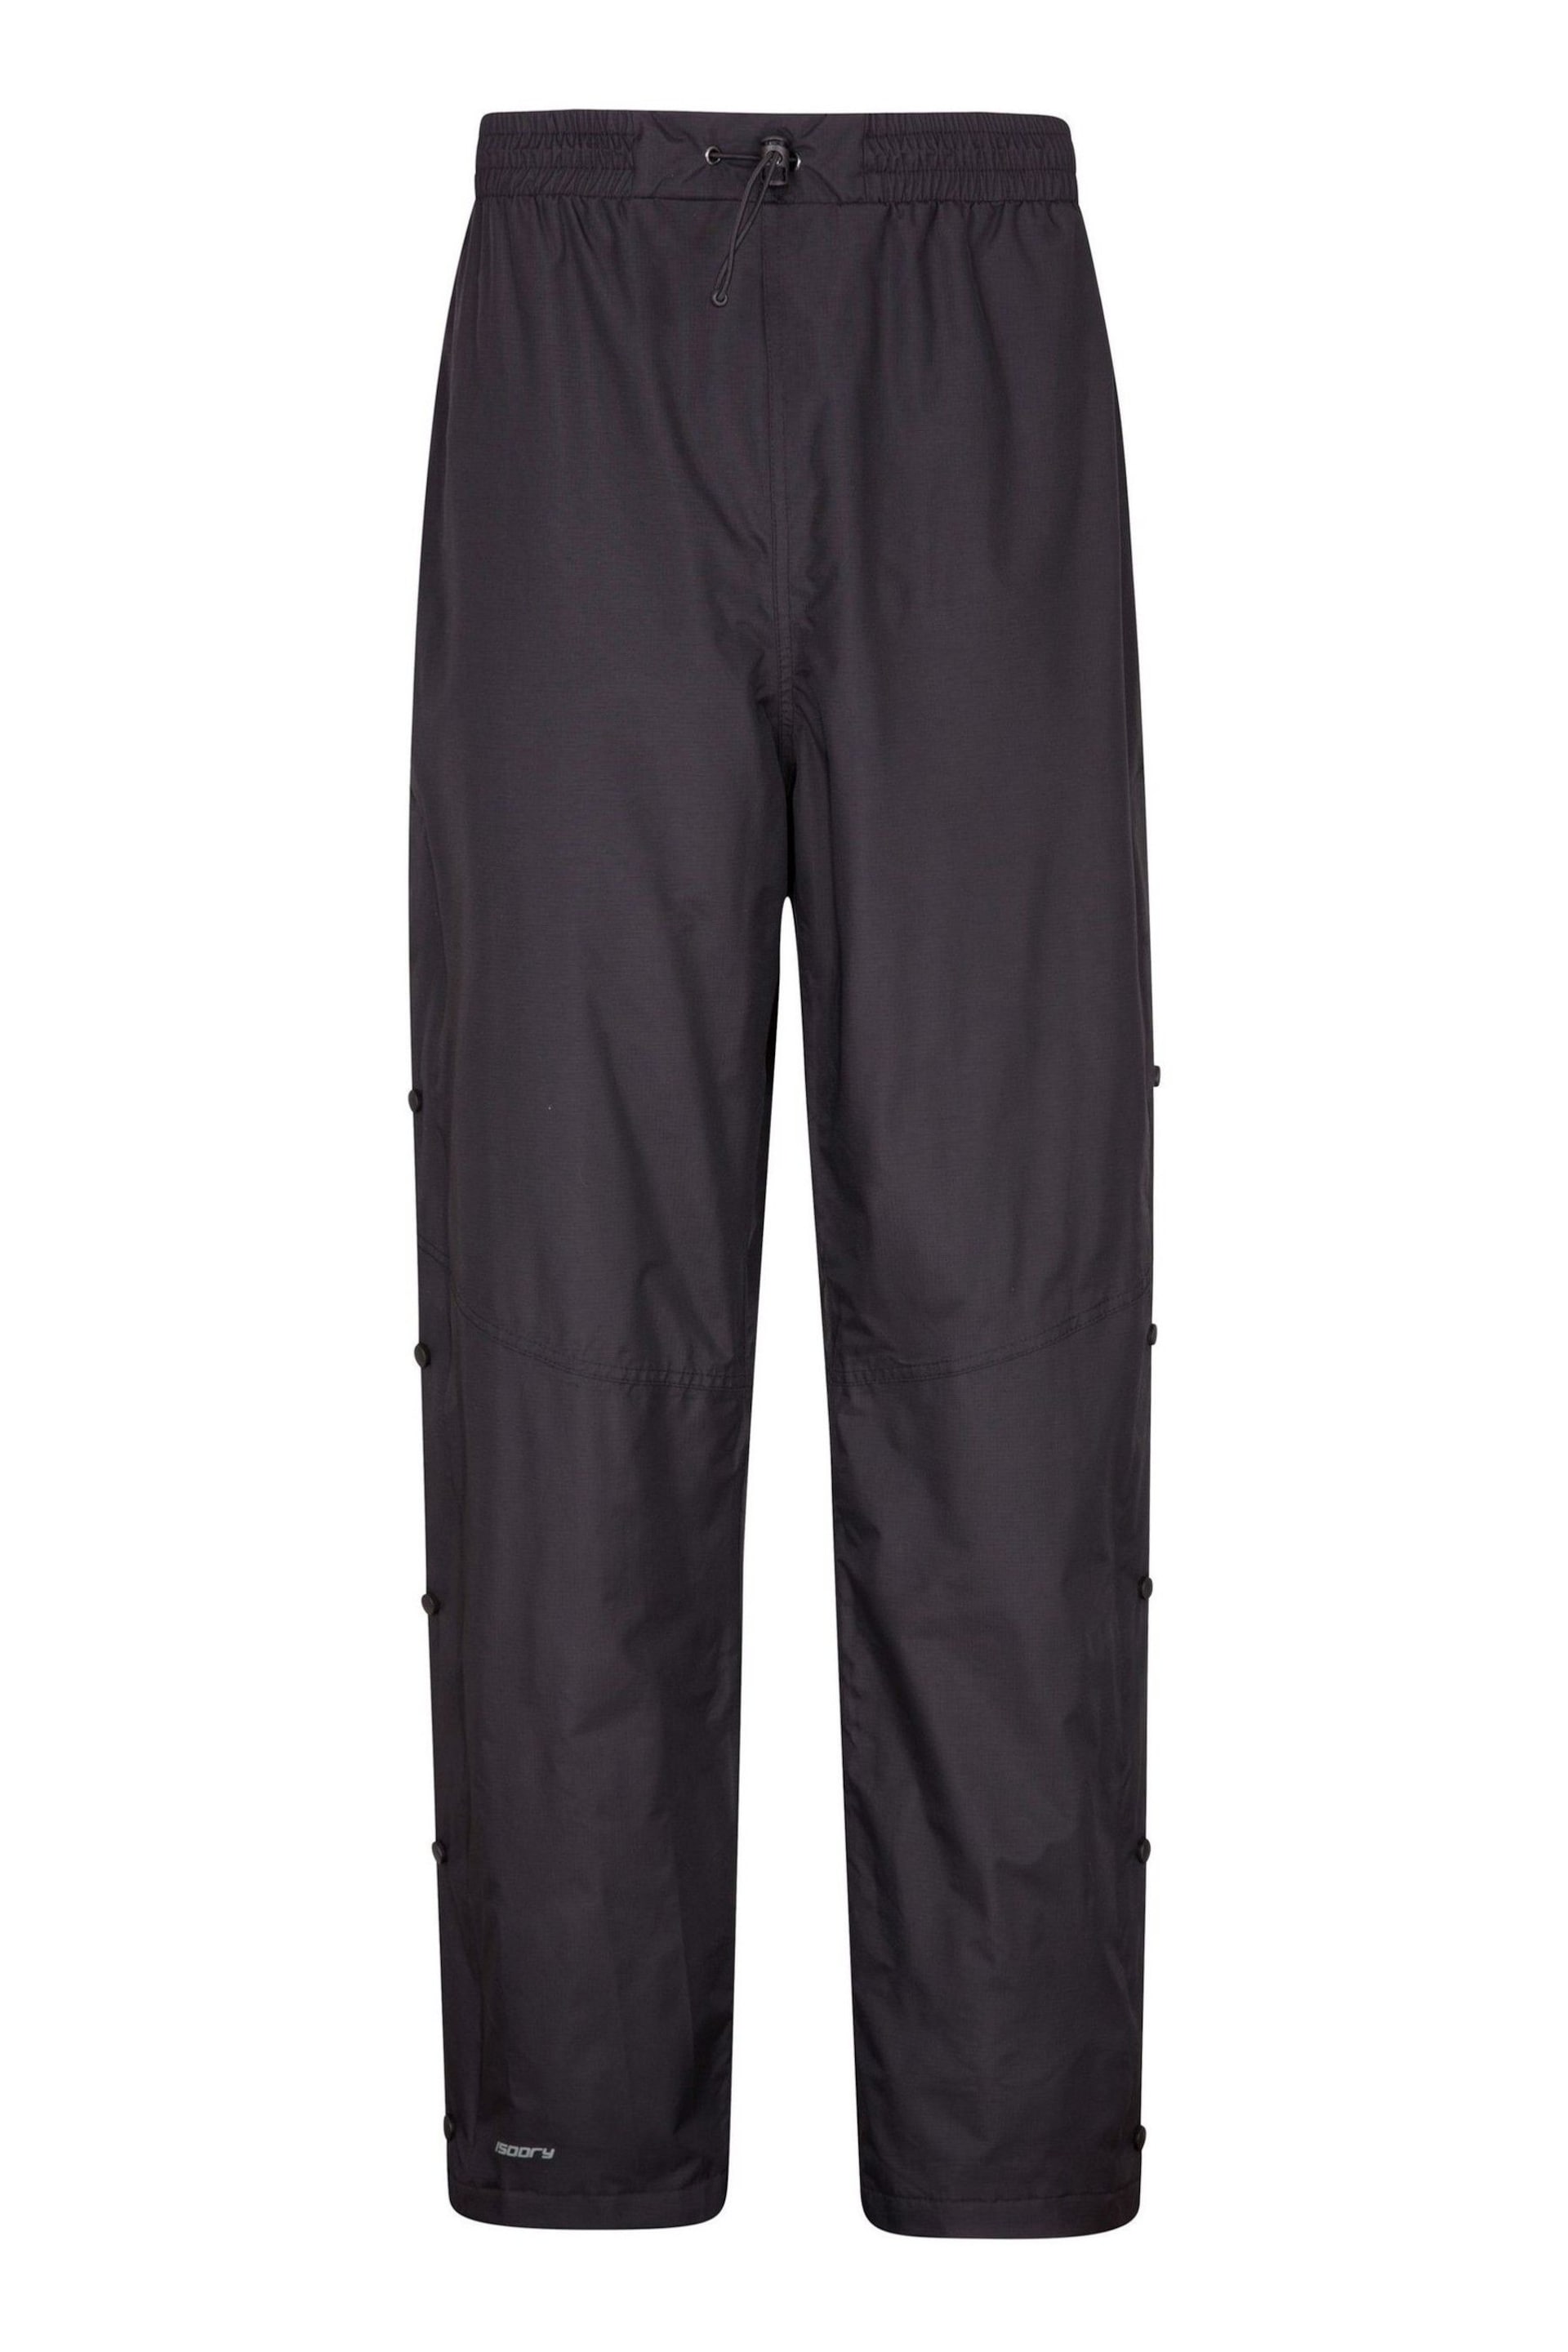 Mountain Warehouse Black Downpour Mens Waterproof Trousers - Image 1 of 5